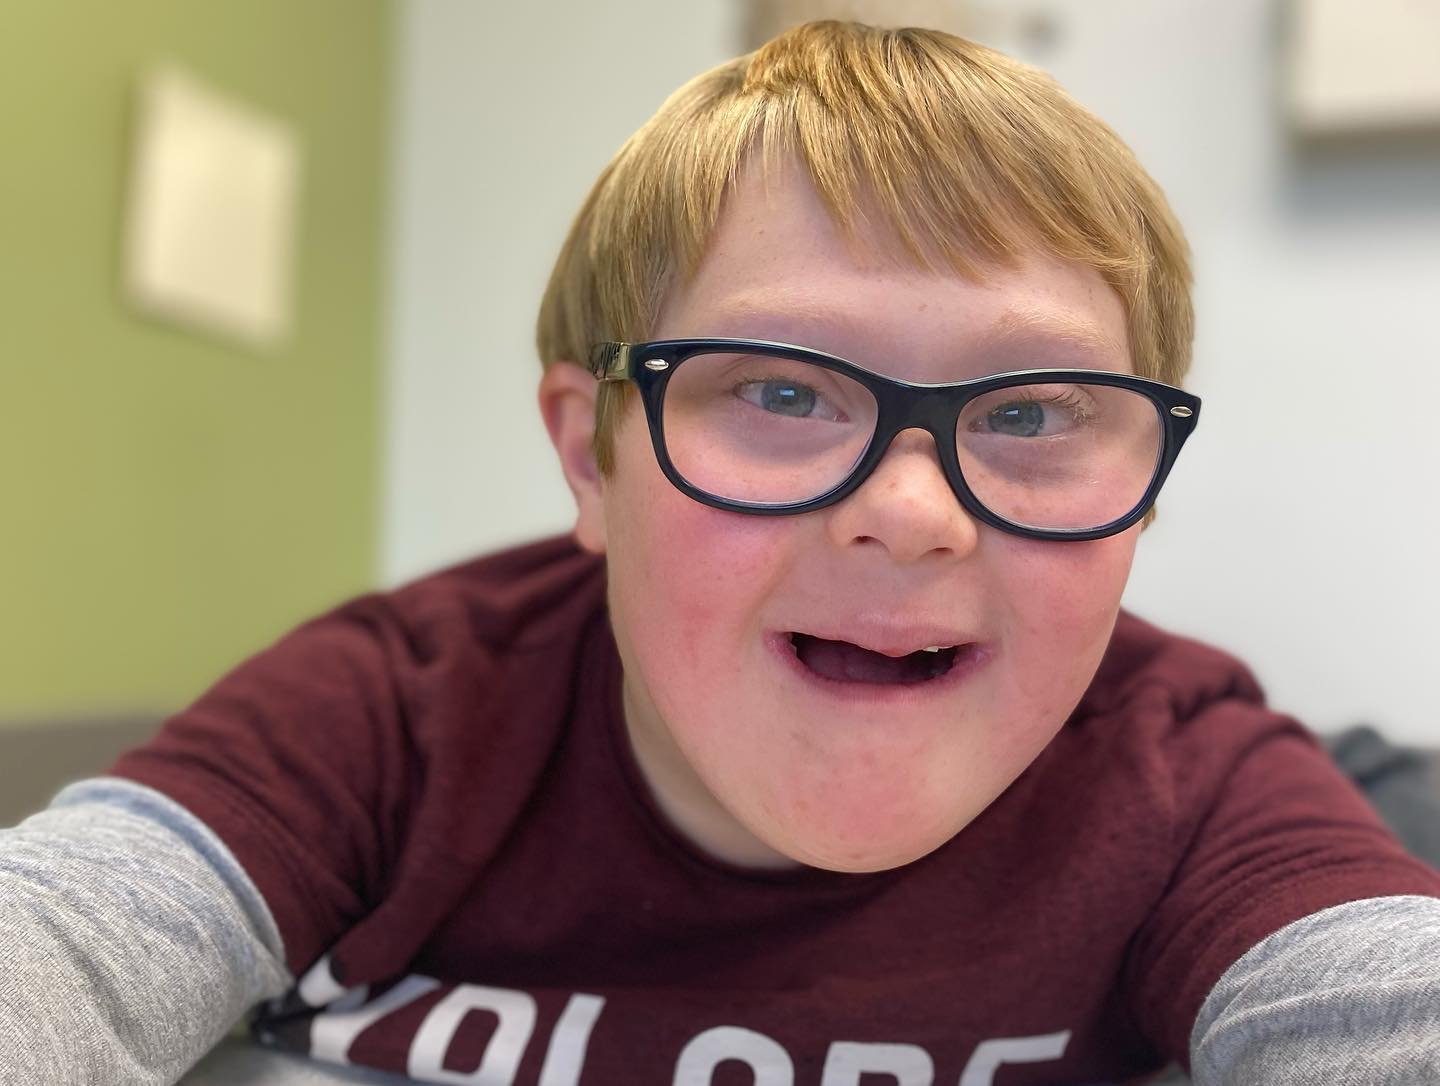 Little boy with Down syndrome wearing glasses and smiling